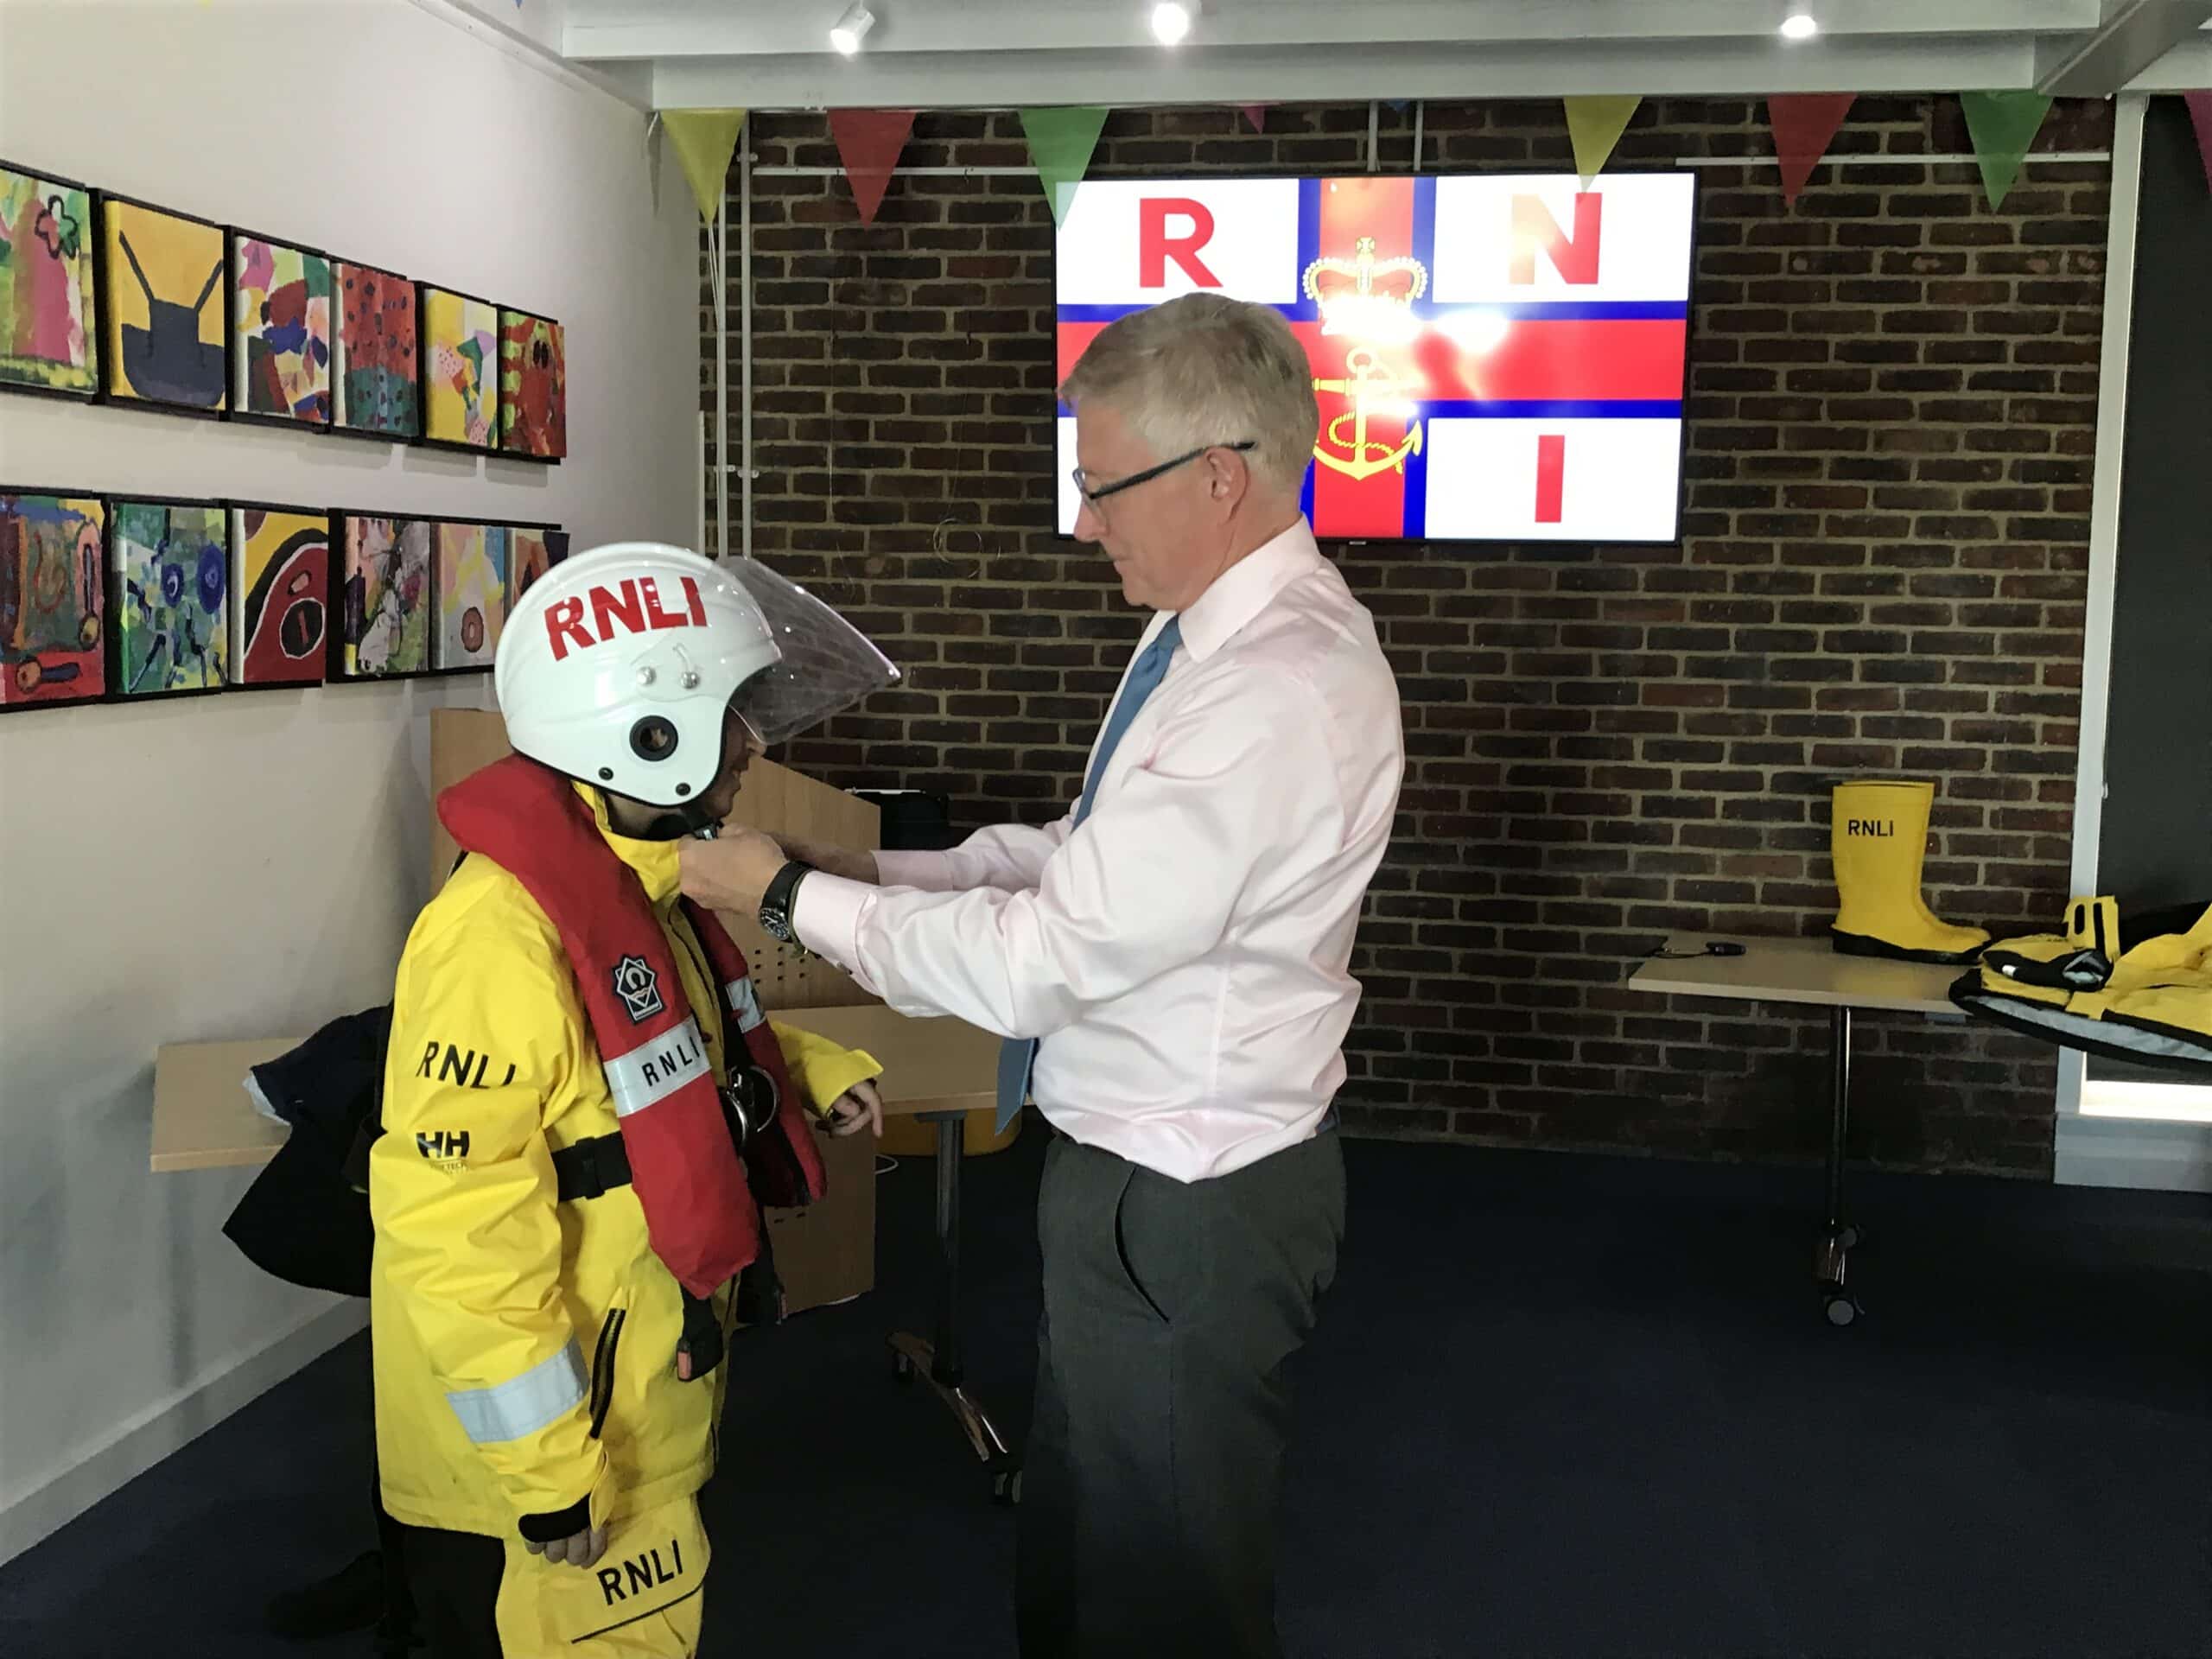 An Insight into the RNLI